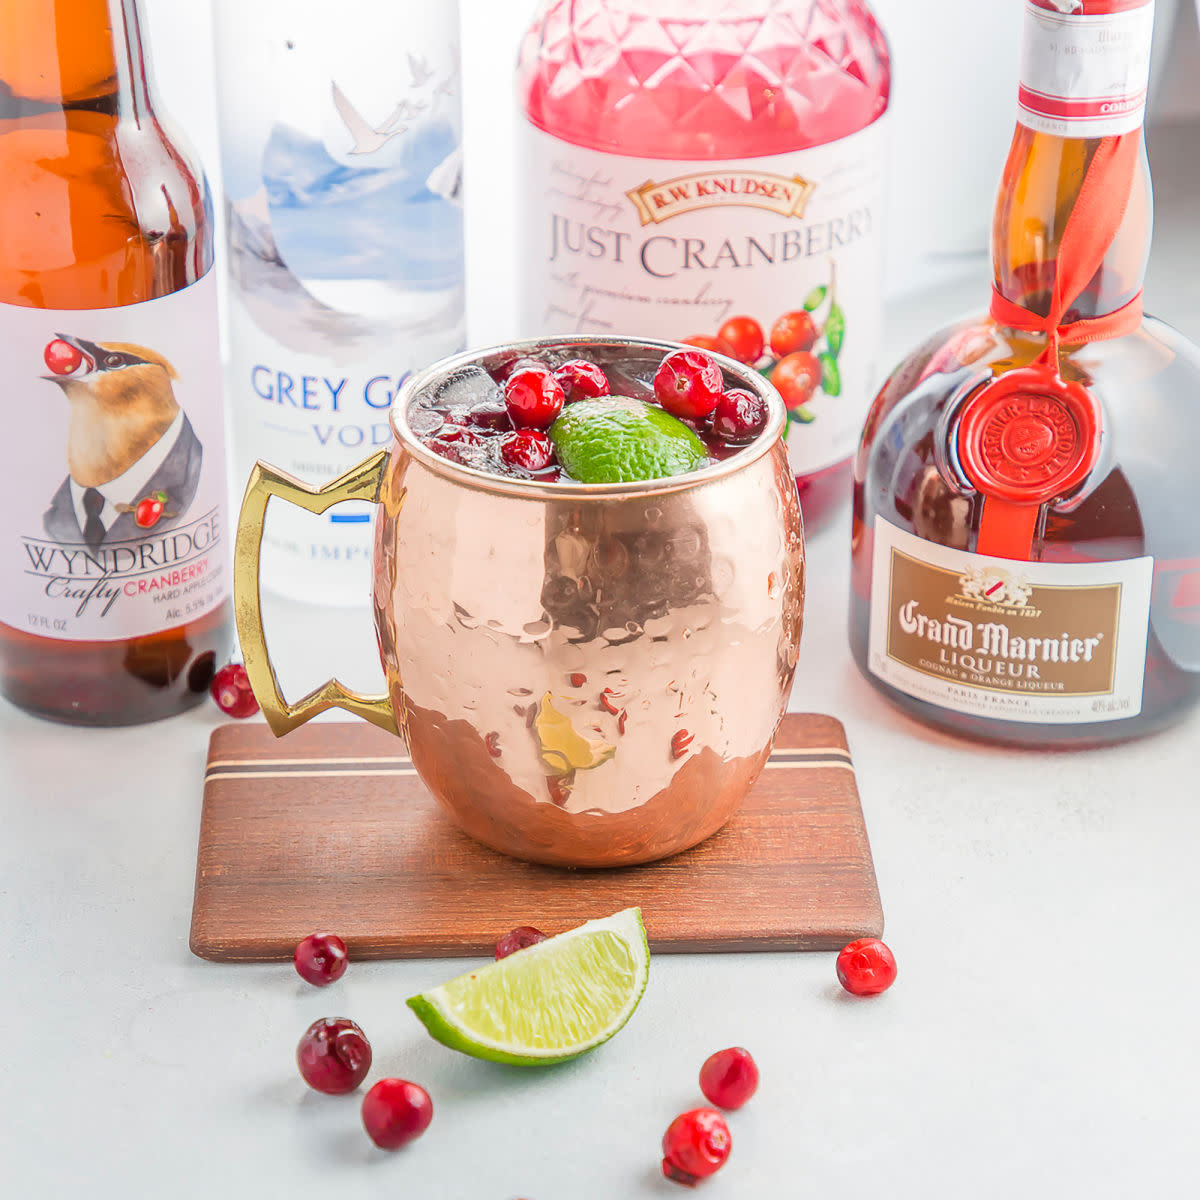 The Winter Mule Cocktail